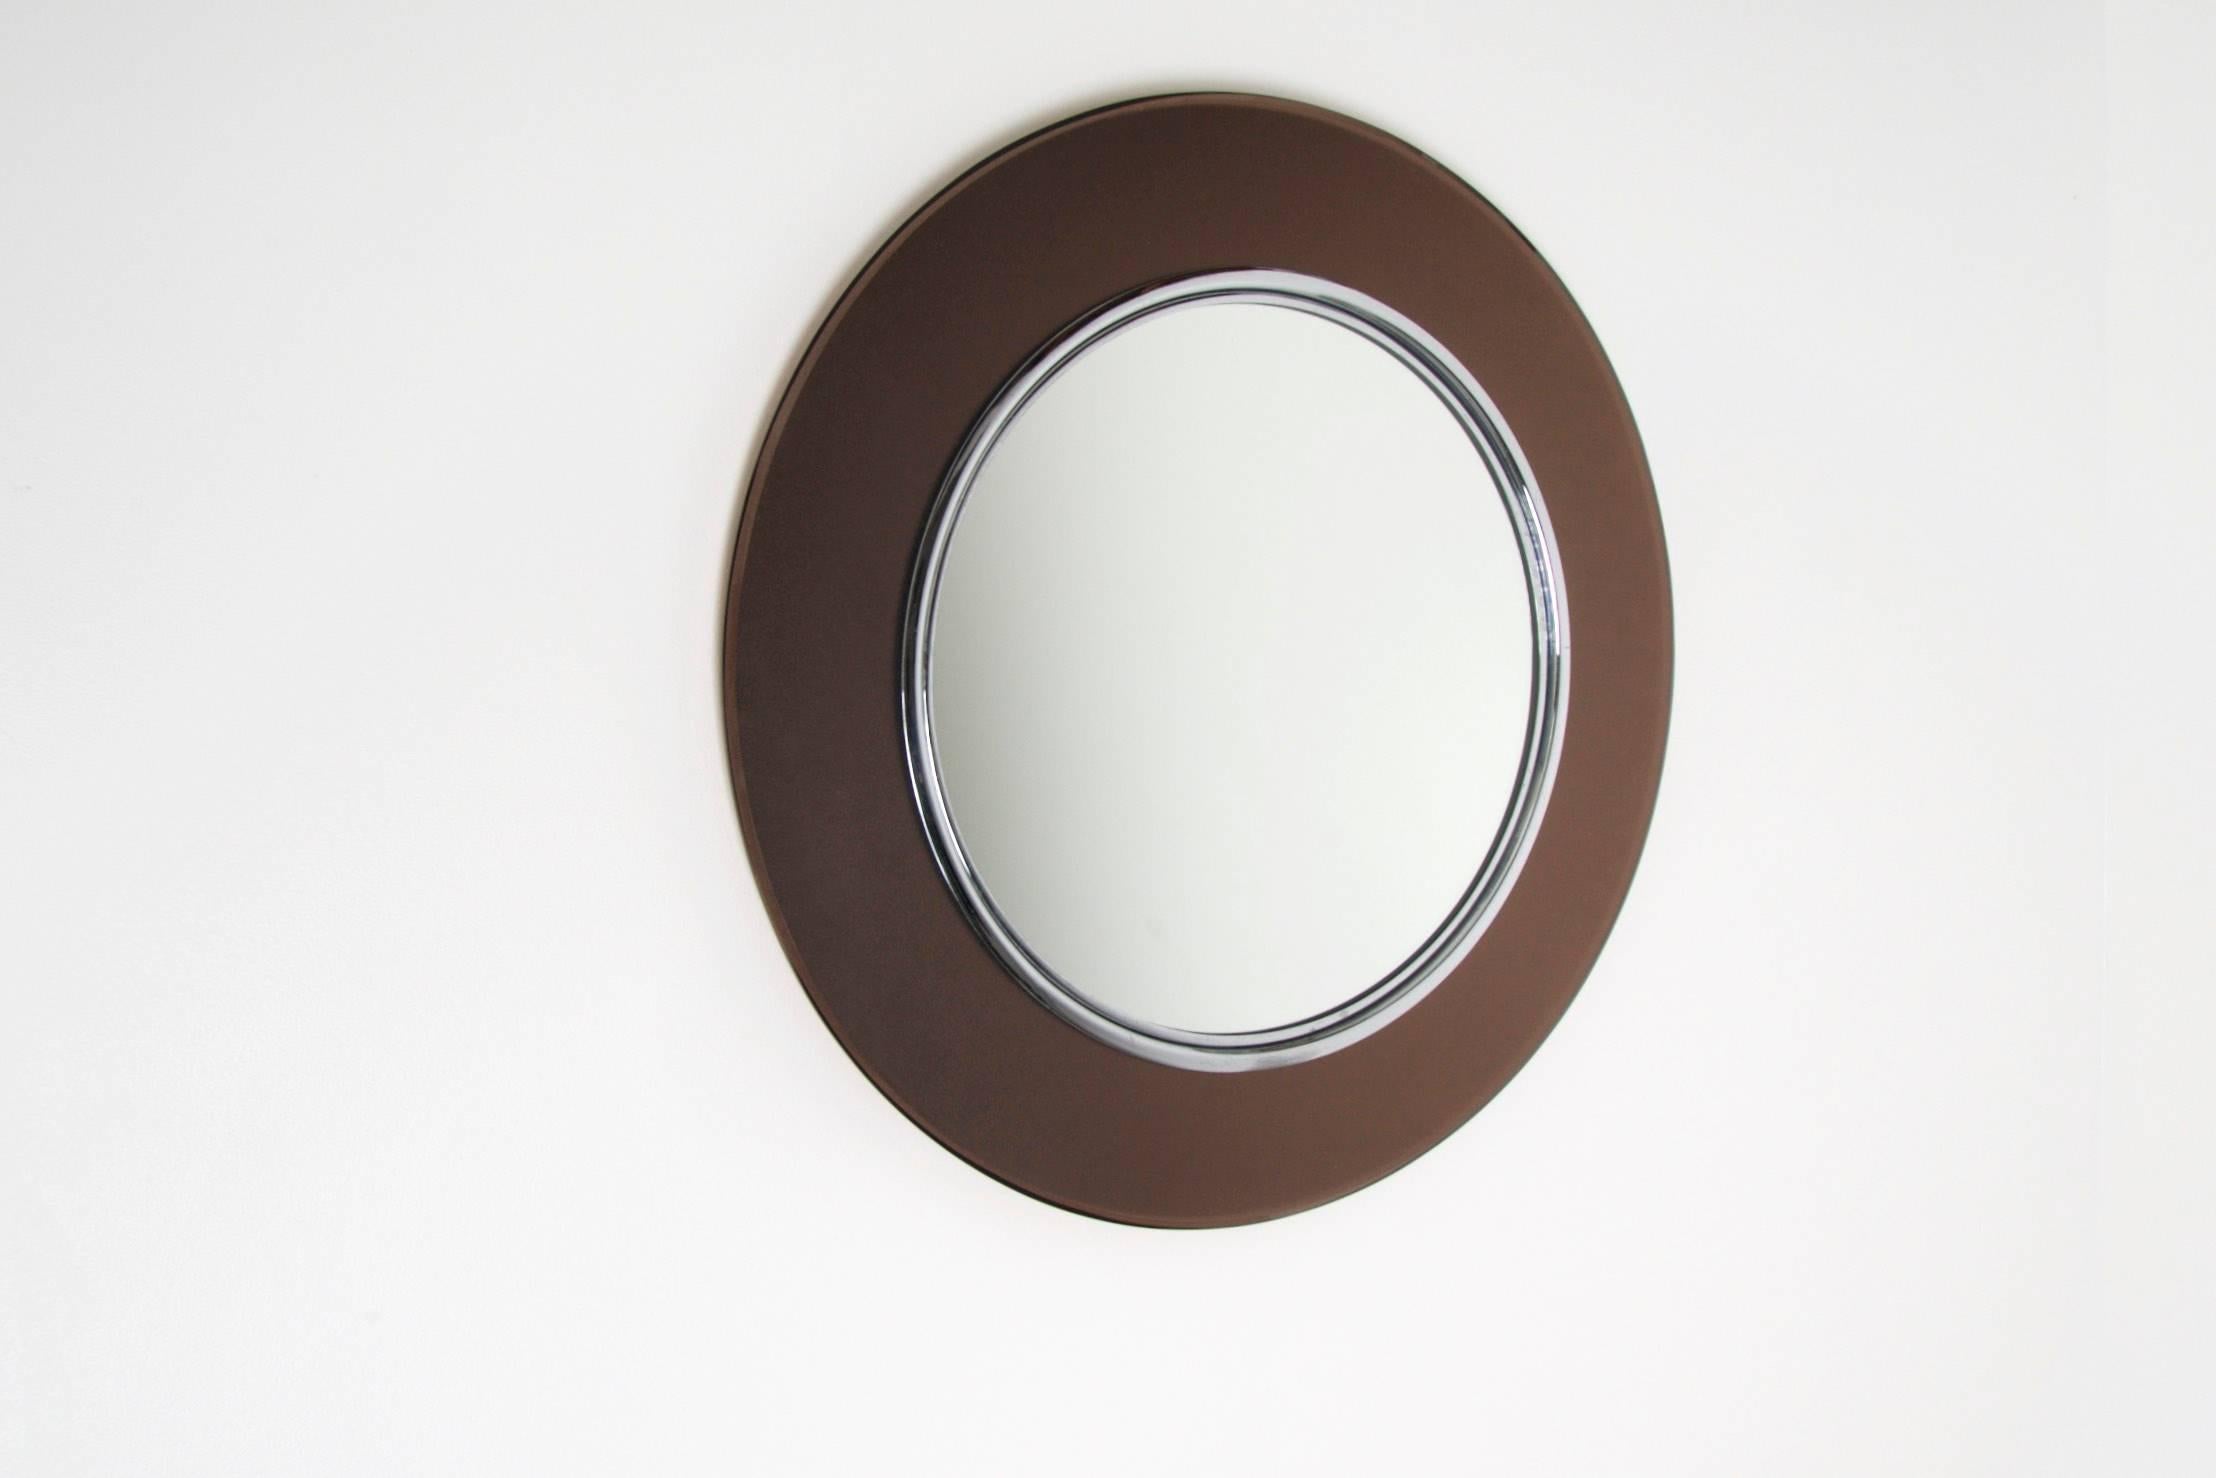 Max Ingrand for Saint Gobain, mirror, 1967
Rare Saint Gobain mirror by Max Ingrand. This circular mirror is made of a frosted brown glass with a frame of chromed steel. The mirror is in very good condition. Saint Gobain is the oldest glass